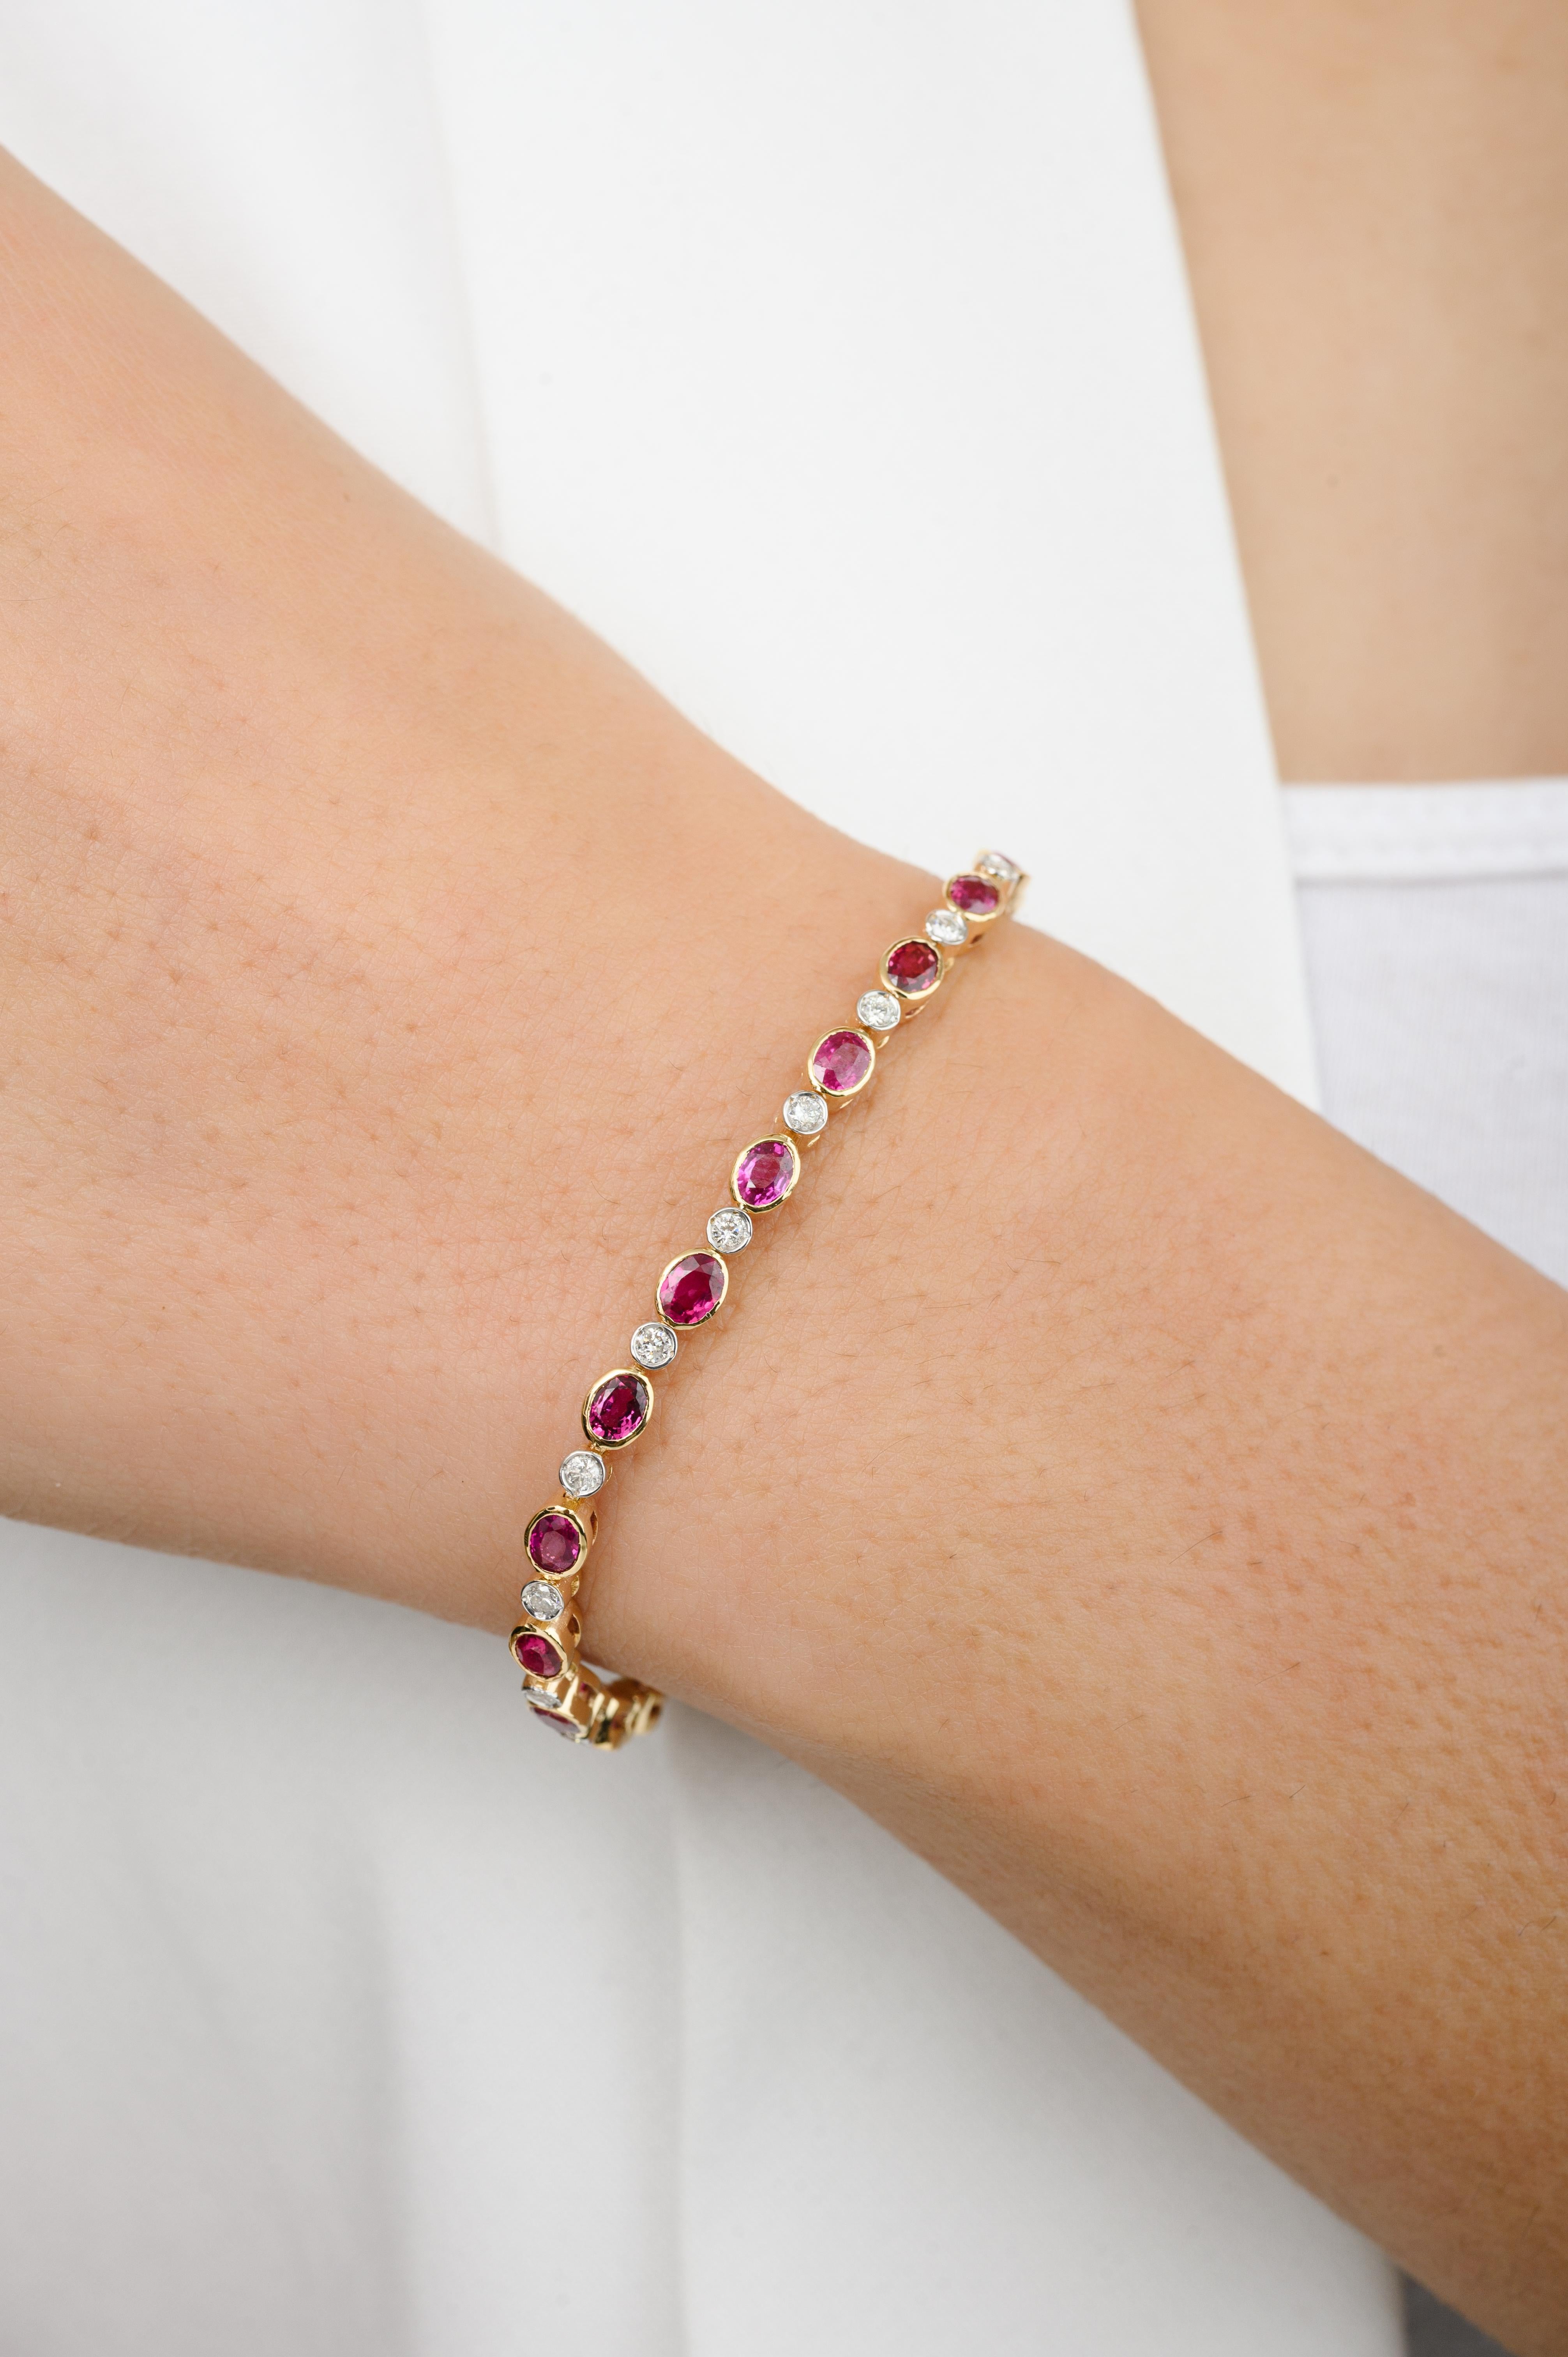 This Diamond and 4.9 Carat Faceted Ruby Tennis Bracelet in 18K gold showcases 4.9 carats endlessly sparkling natural ruby and 0.61 carats of diamonds. It measures 7 inches long in length. 
Ruby improves mental strength. 
Designed with perfect oval